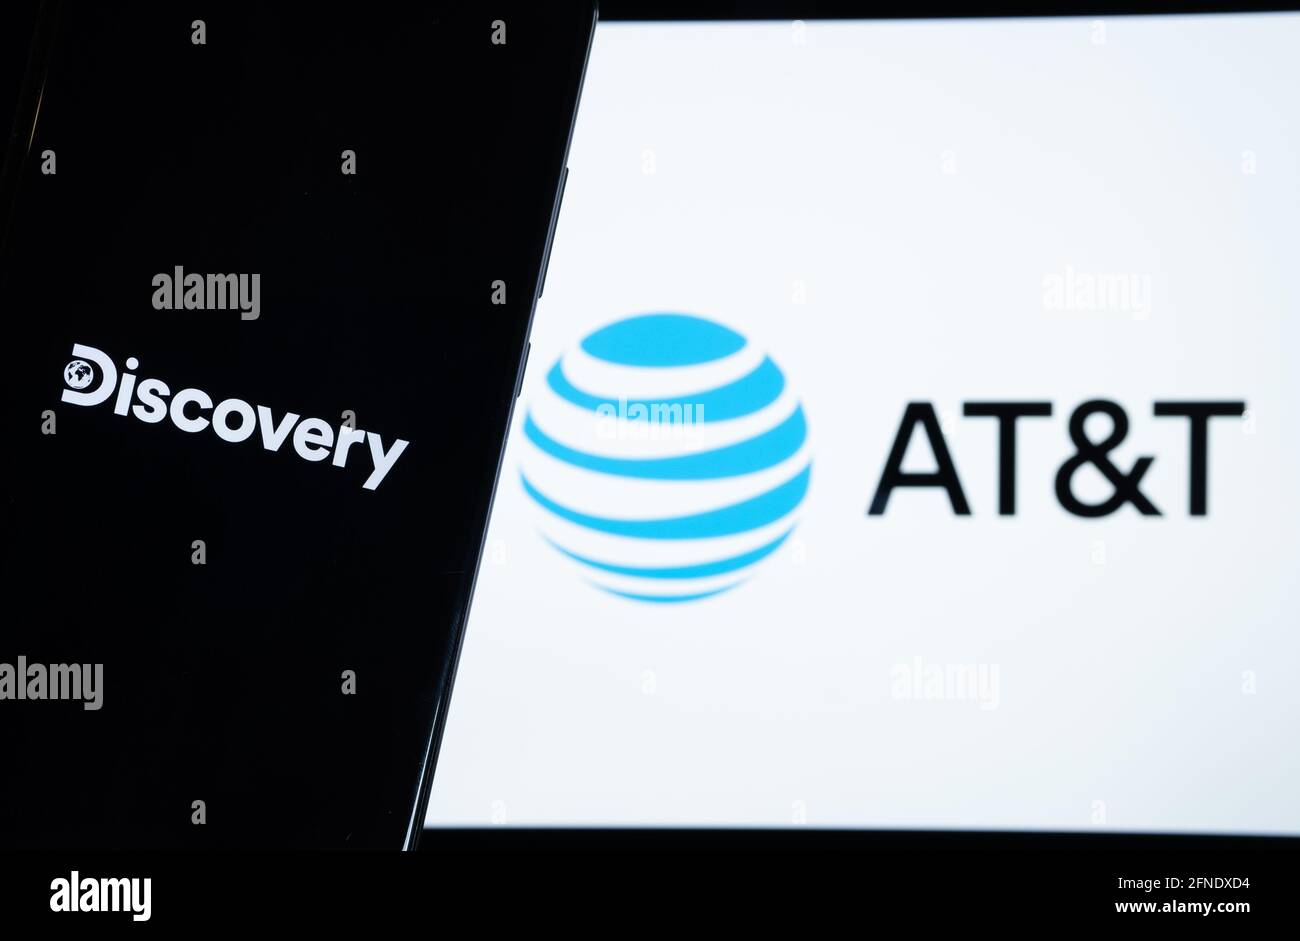 Discovery and AT&T merger concept. Discovery logo seen on dark smartphone and AT&T logo on the blurred laptop screen on the back. Staffor, United King Stock Photo